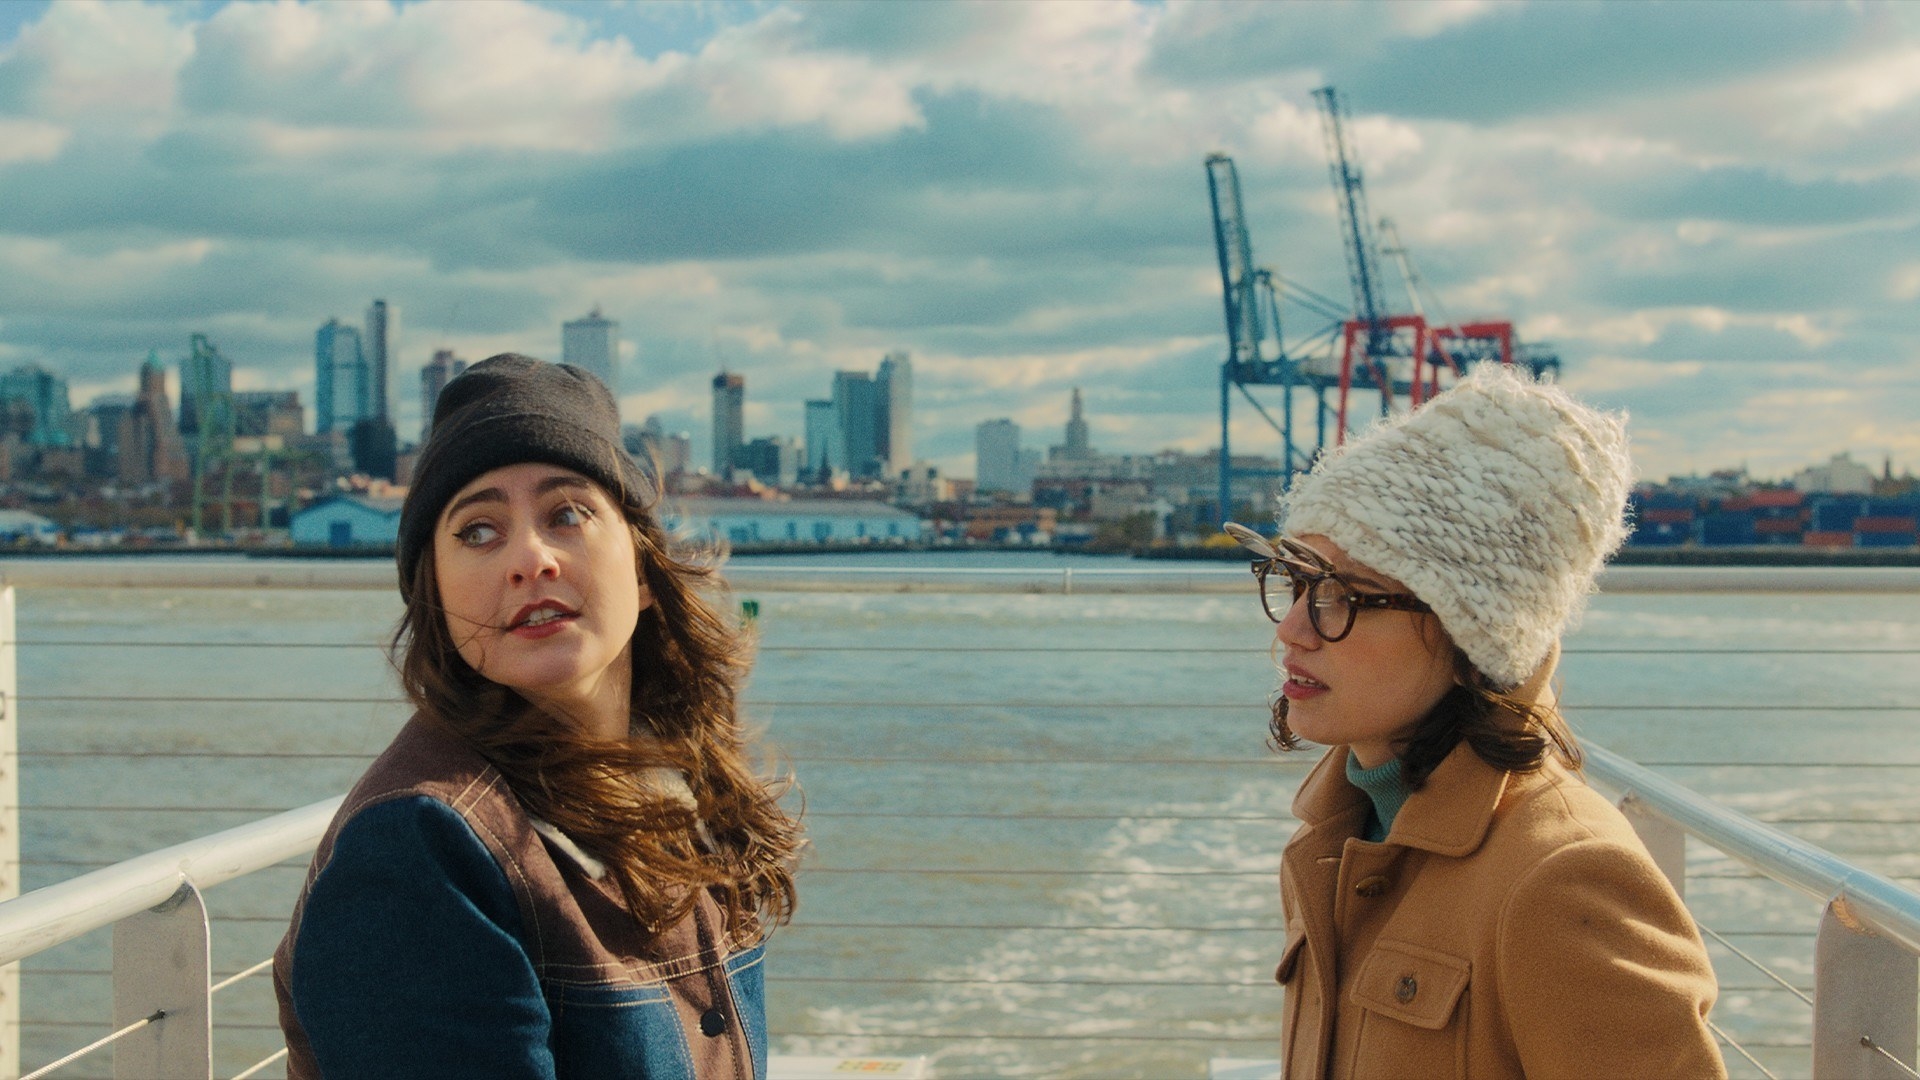 Catherine Cohen and Francesca Reale stand on a boat looking out at New York Harbor